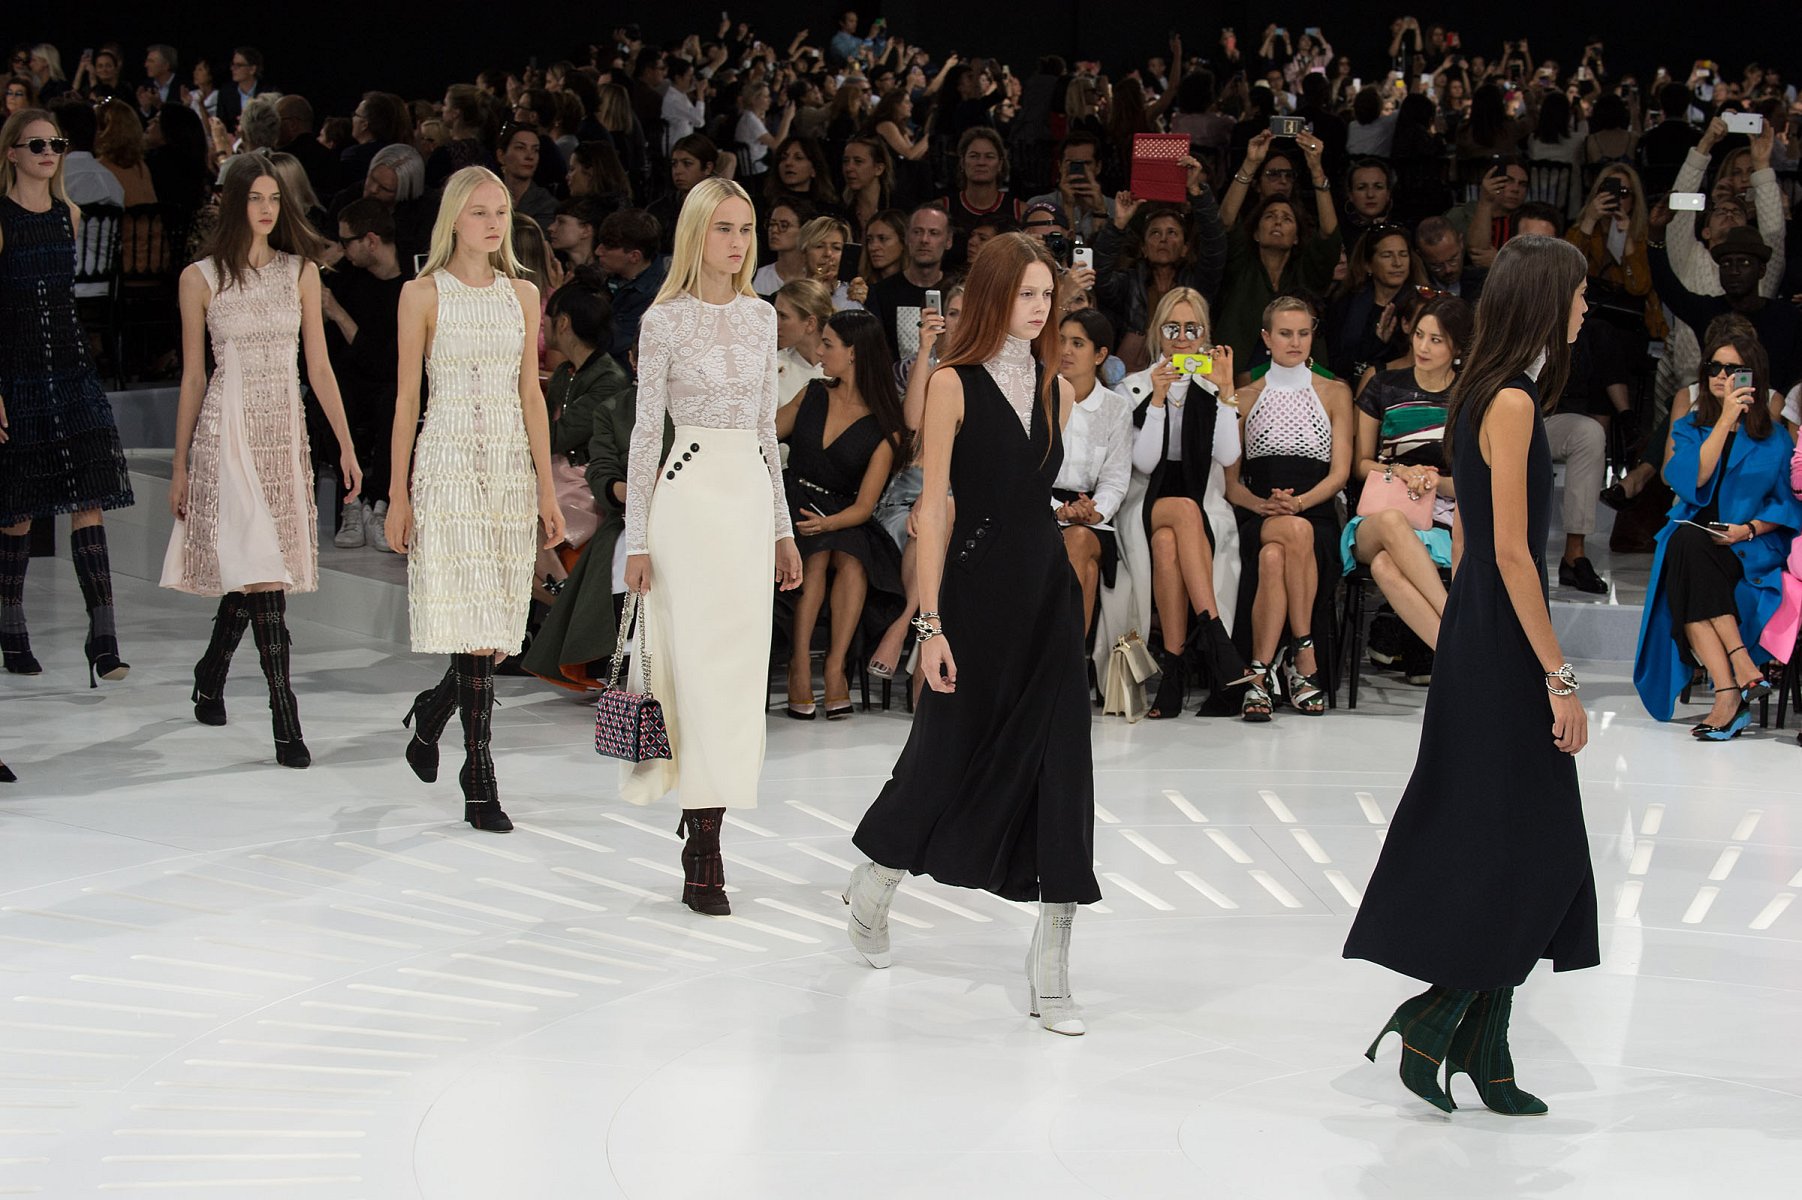 Christian Dior's Spring/Summer 2015 ready-to-wear fashion collection